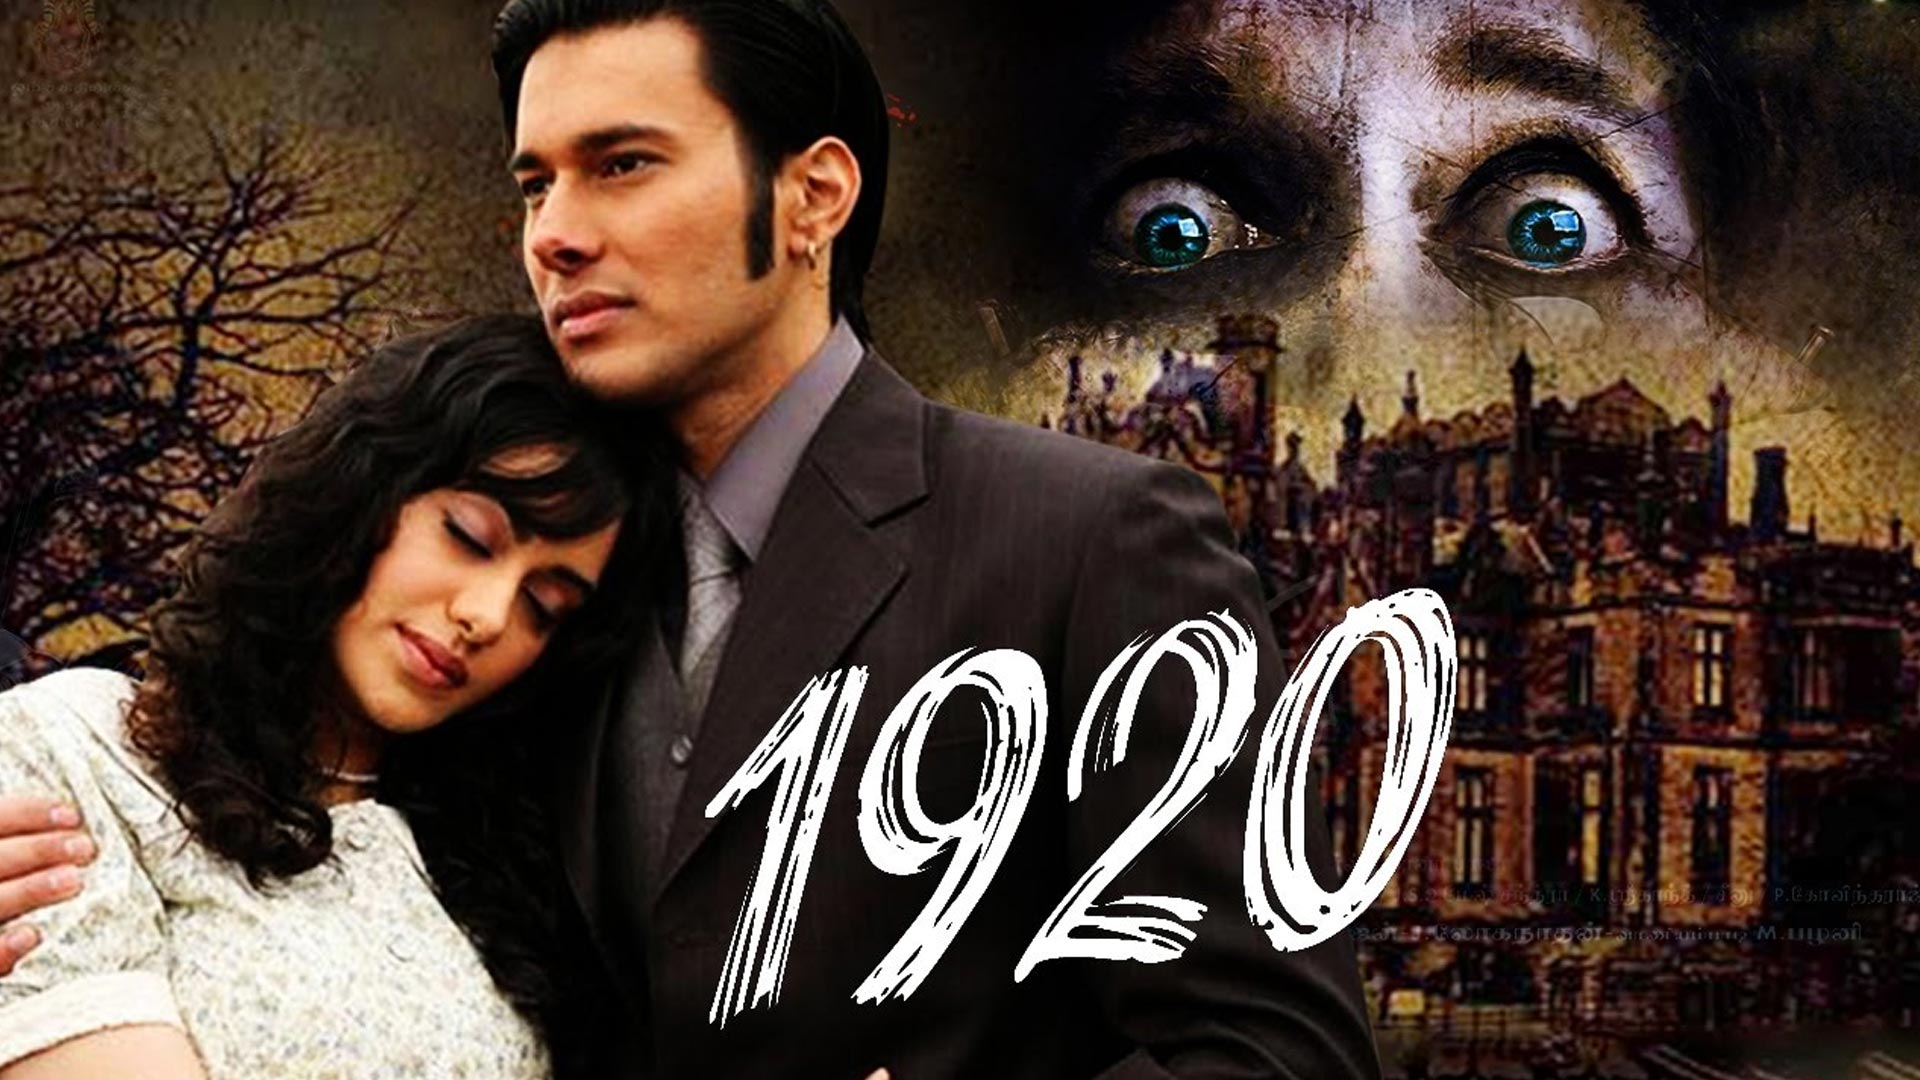 1920 new movie review in hindi